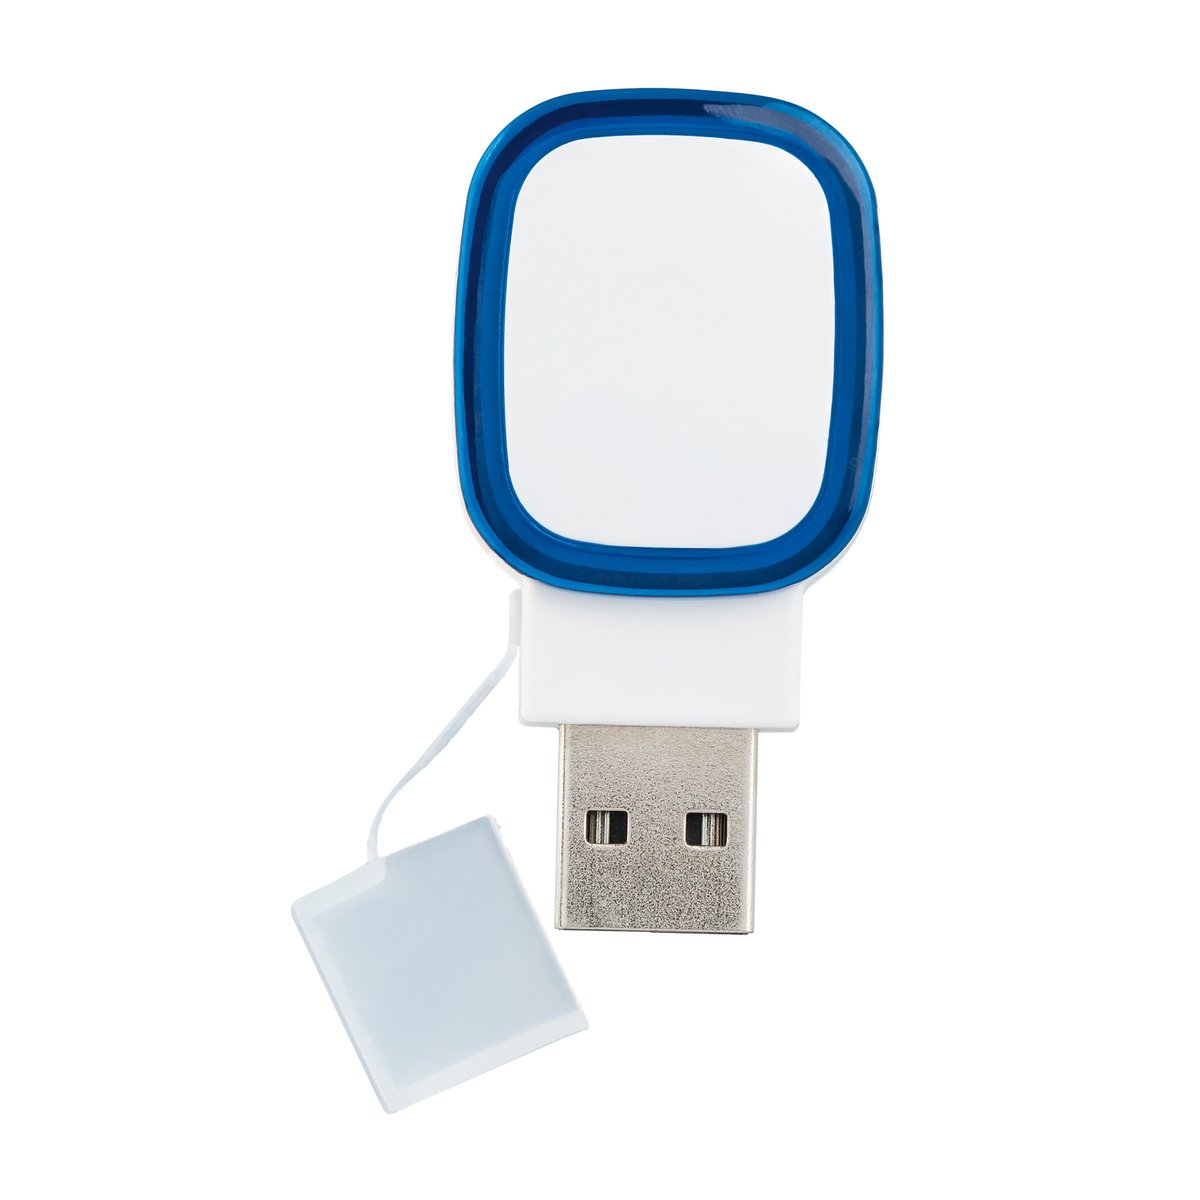 USB Flash Drive COLLECTION 500 blue 4GB